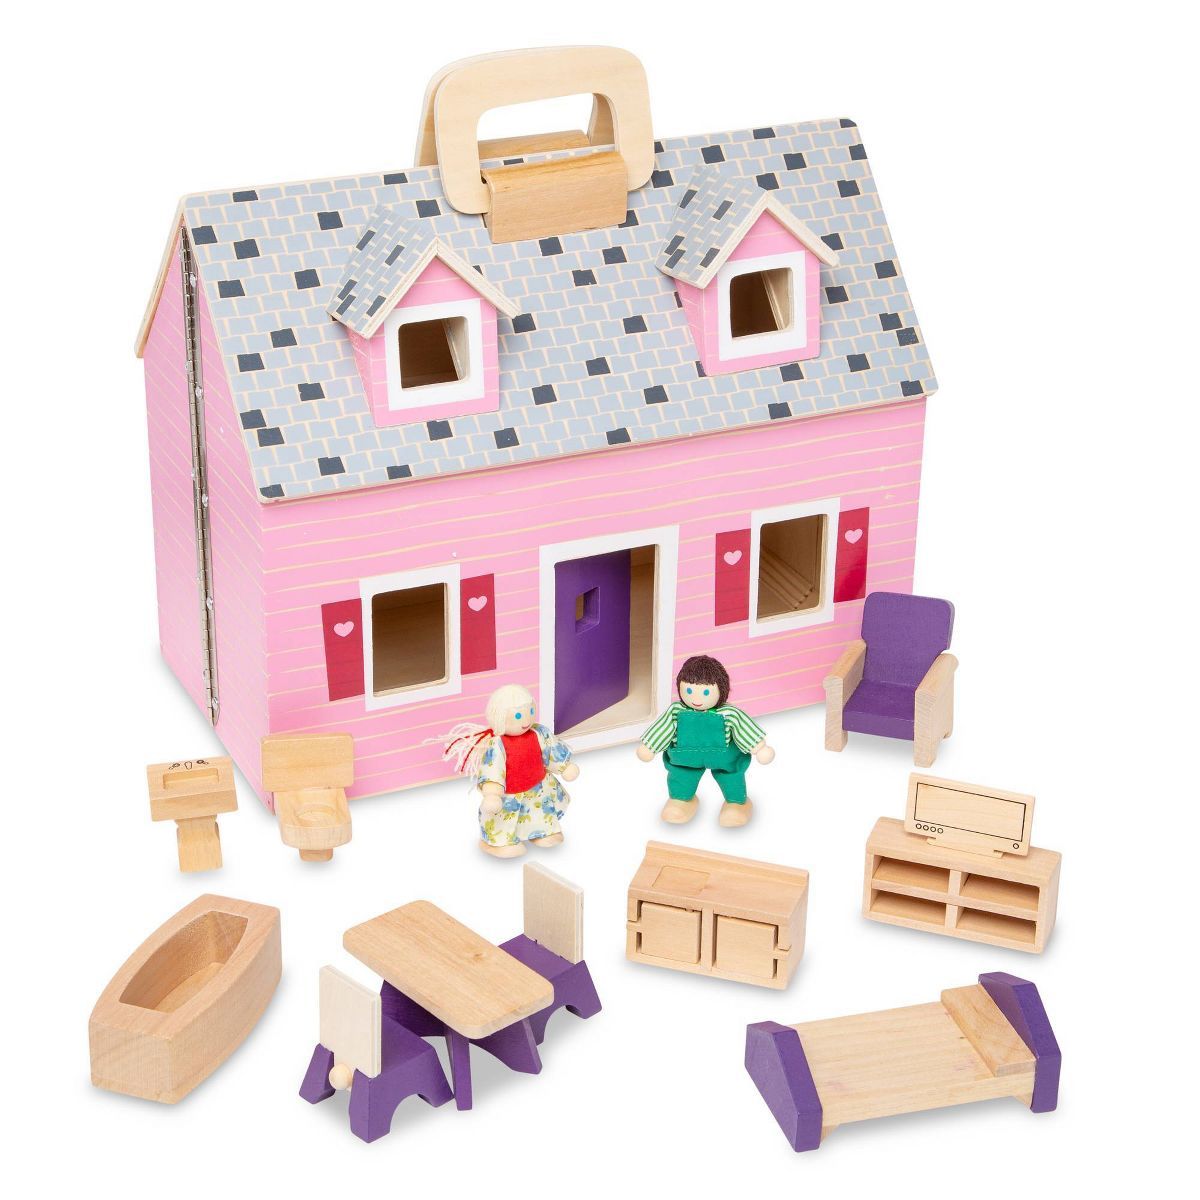 Melissa & Doug Fold and Go Wooden Dollhouse With 2 Dolls and Wooden Furniture | Target